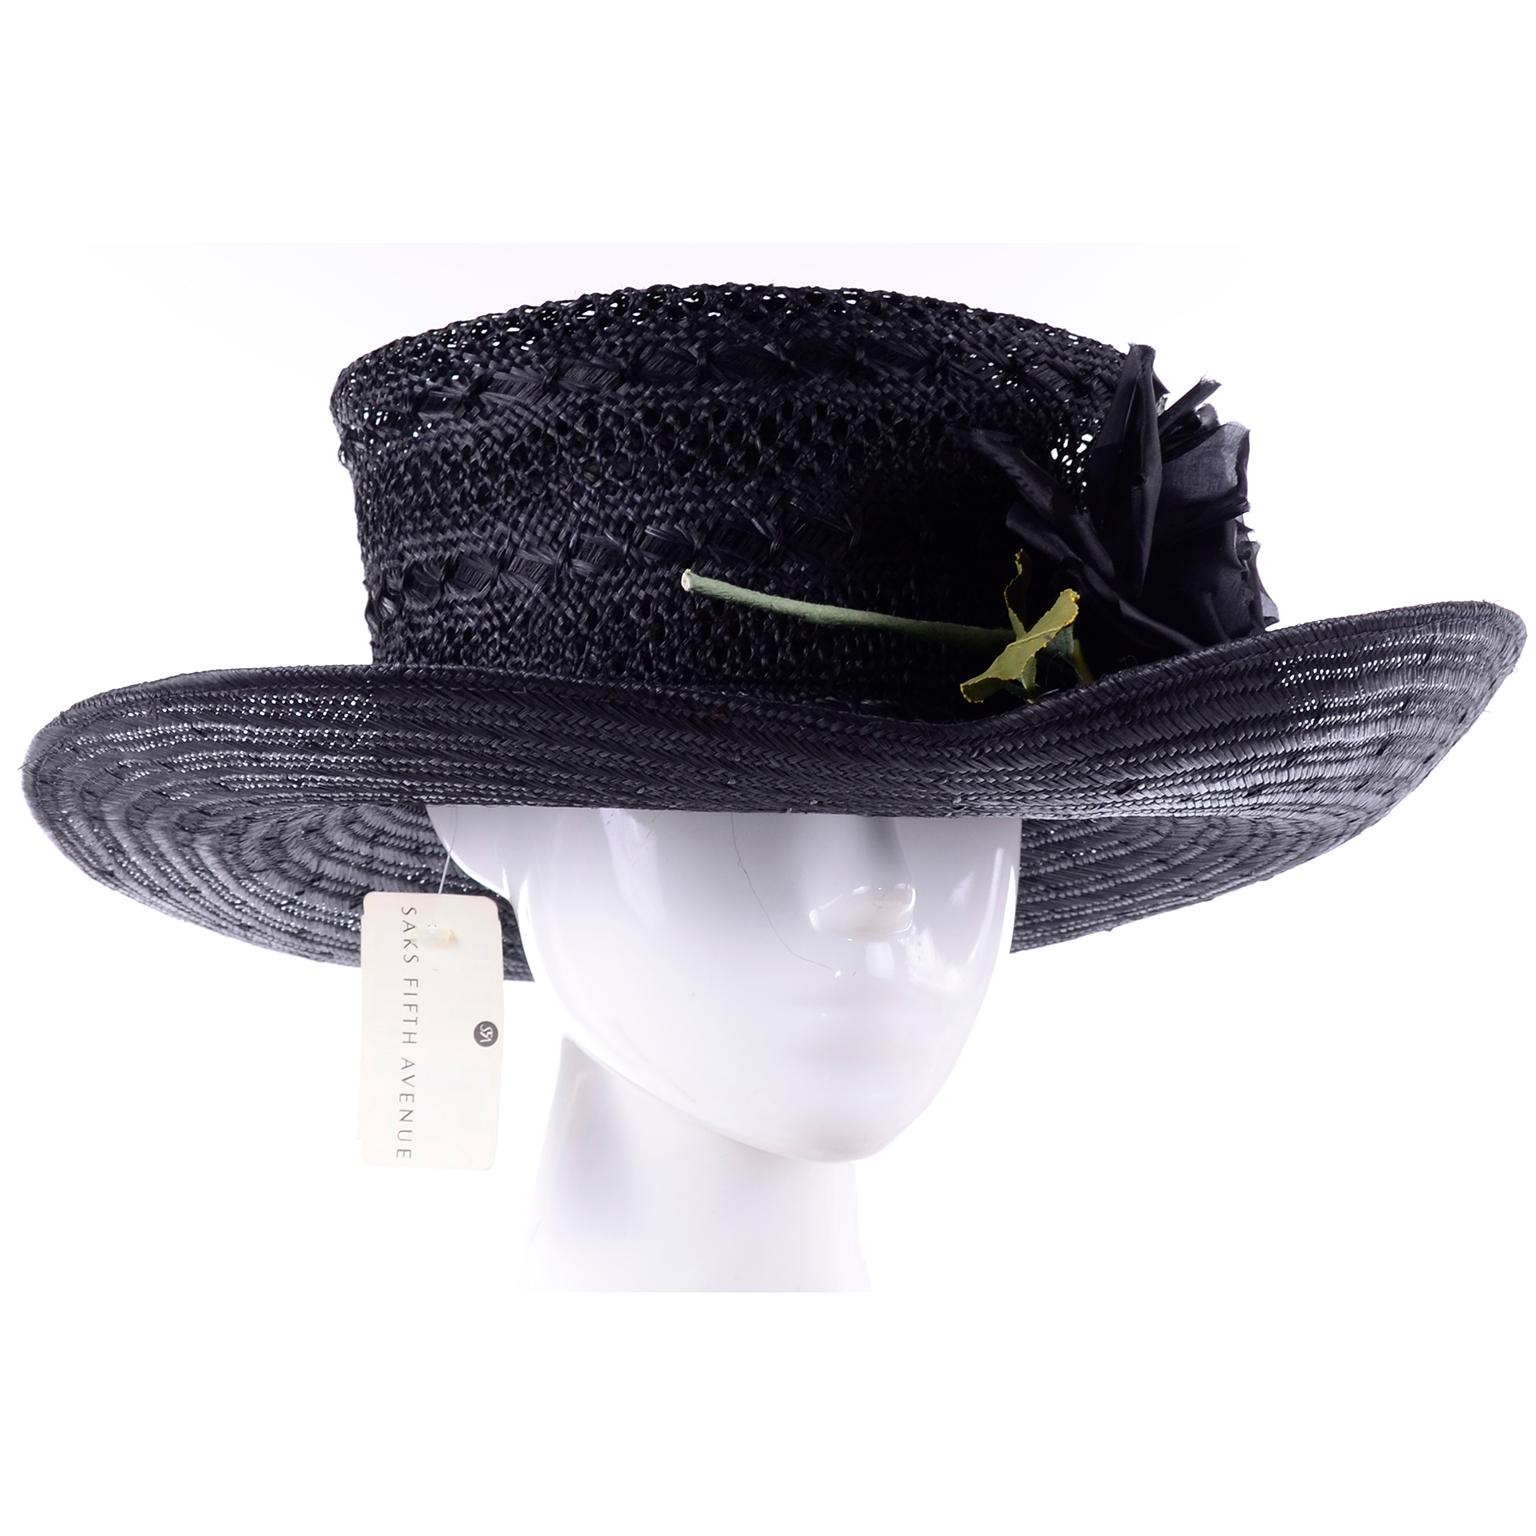 Deadstock Saks Fifth Avenue Vintage Black Straw Upturned Brim Hat New With Tags 2